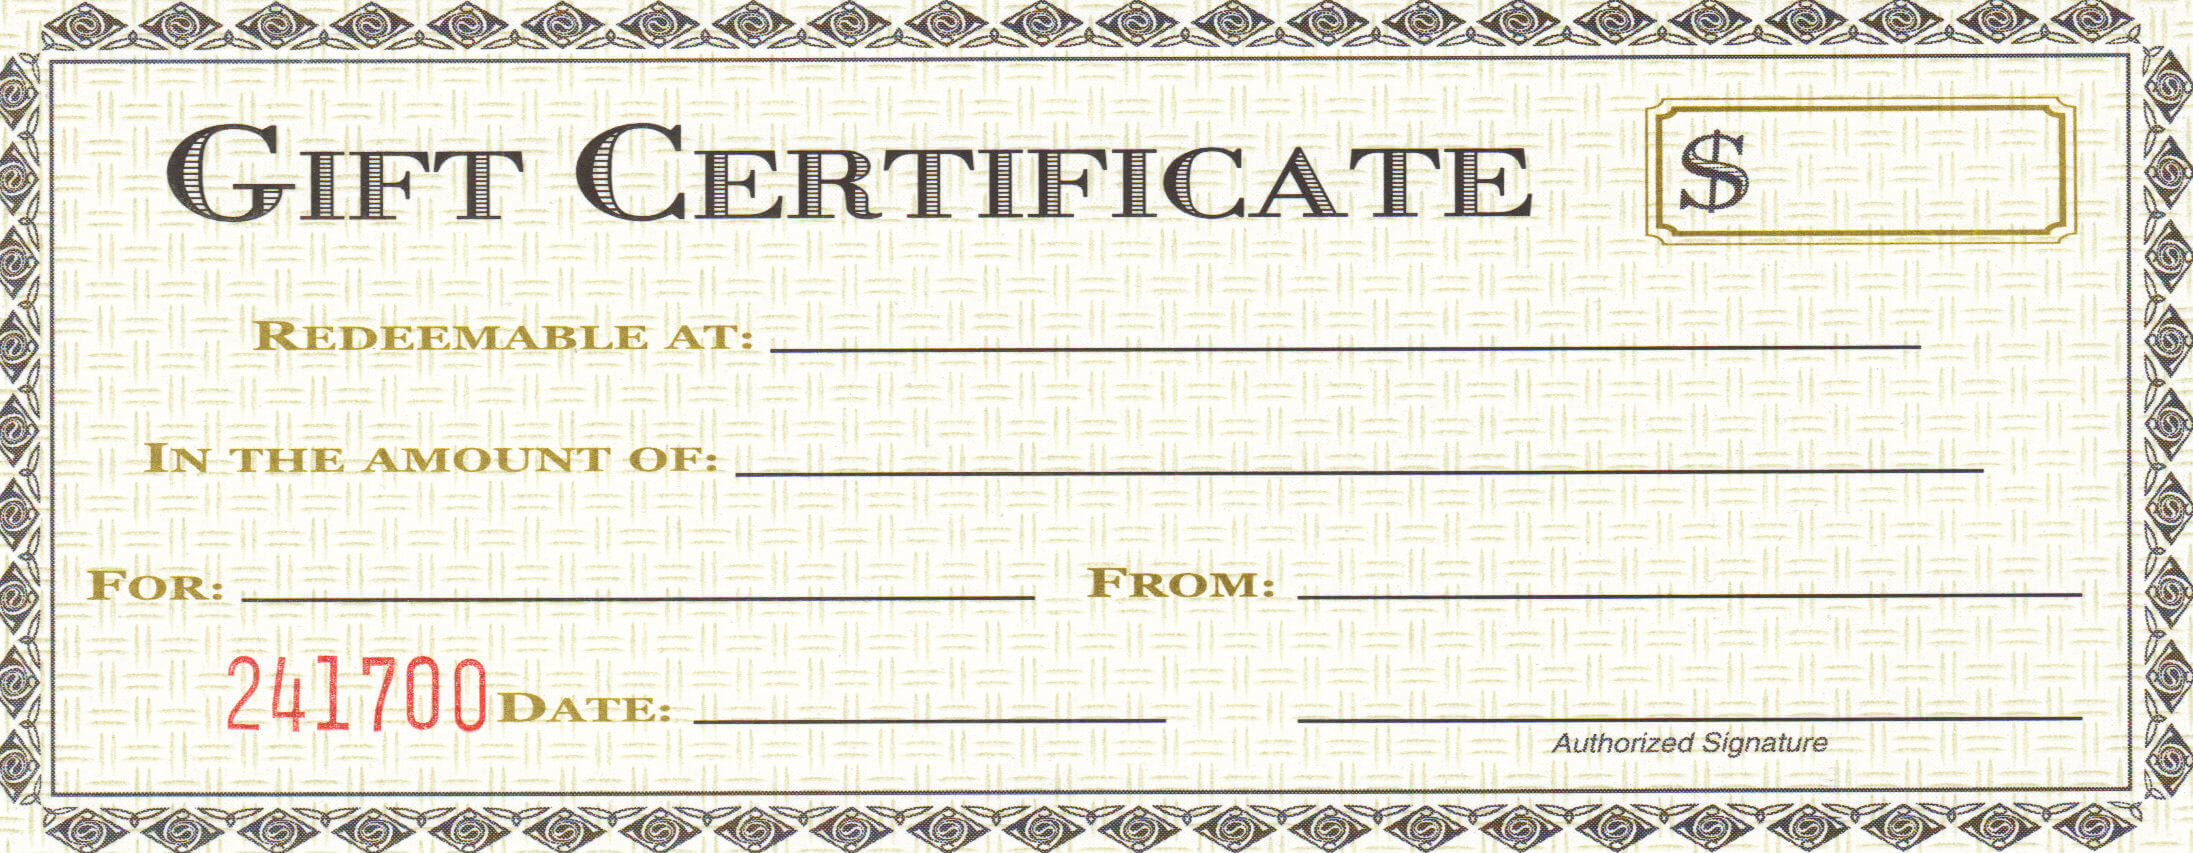 28 Cool Printable Gift Certificates | Kittybabylove Inside Generic Certificate Template